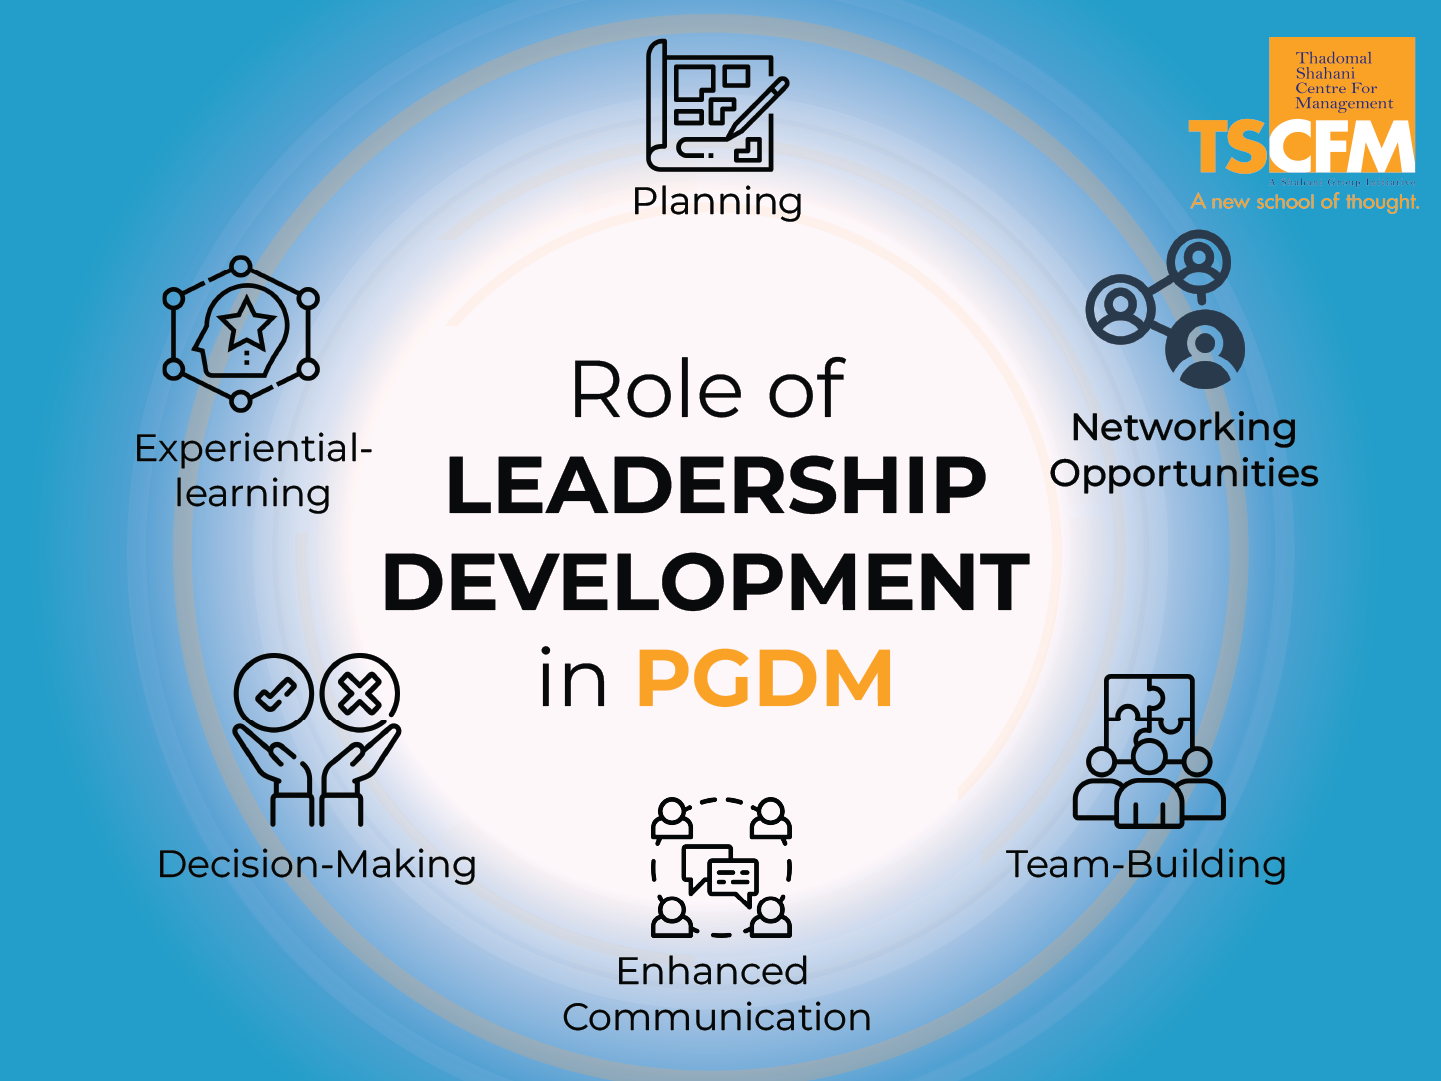 Crucial Role of Leadership Development in PGDM Programs